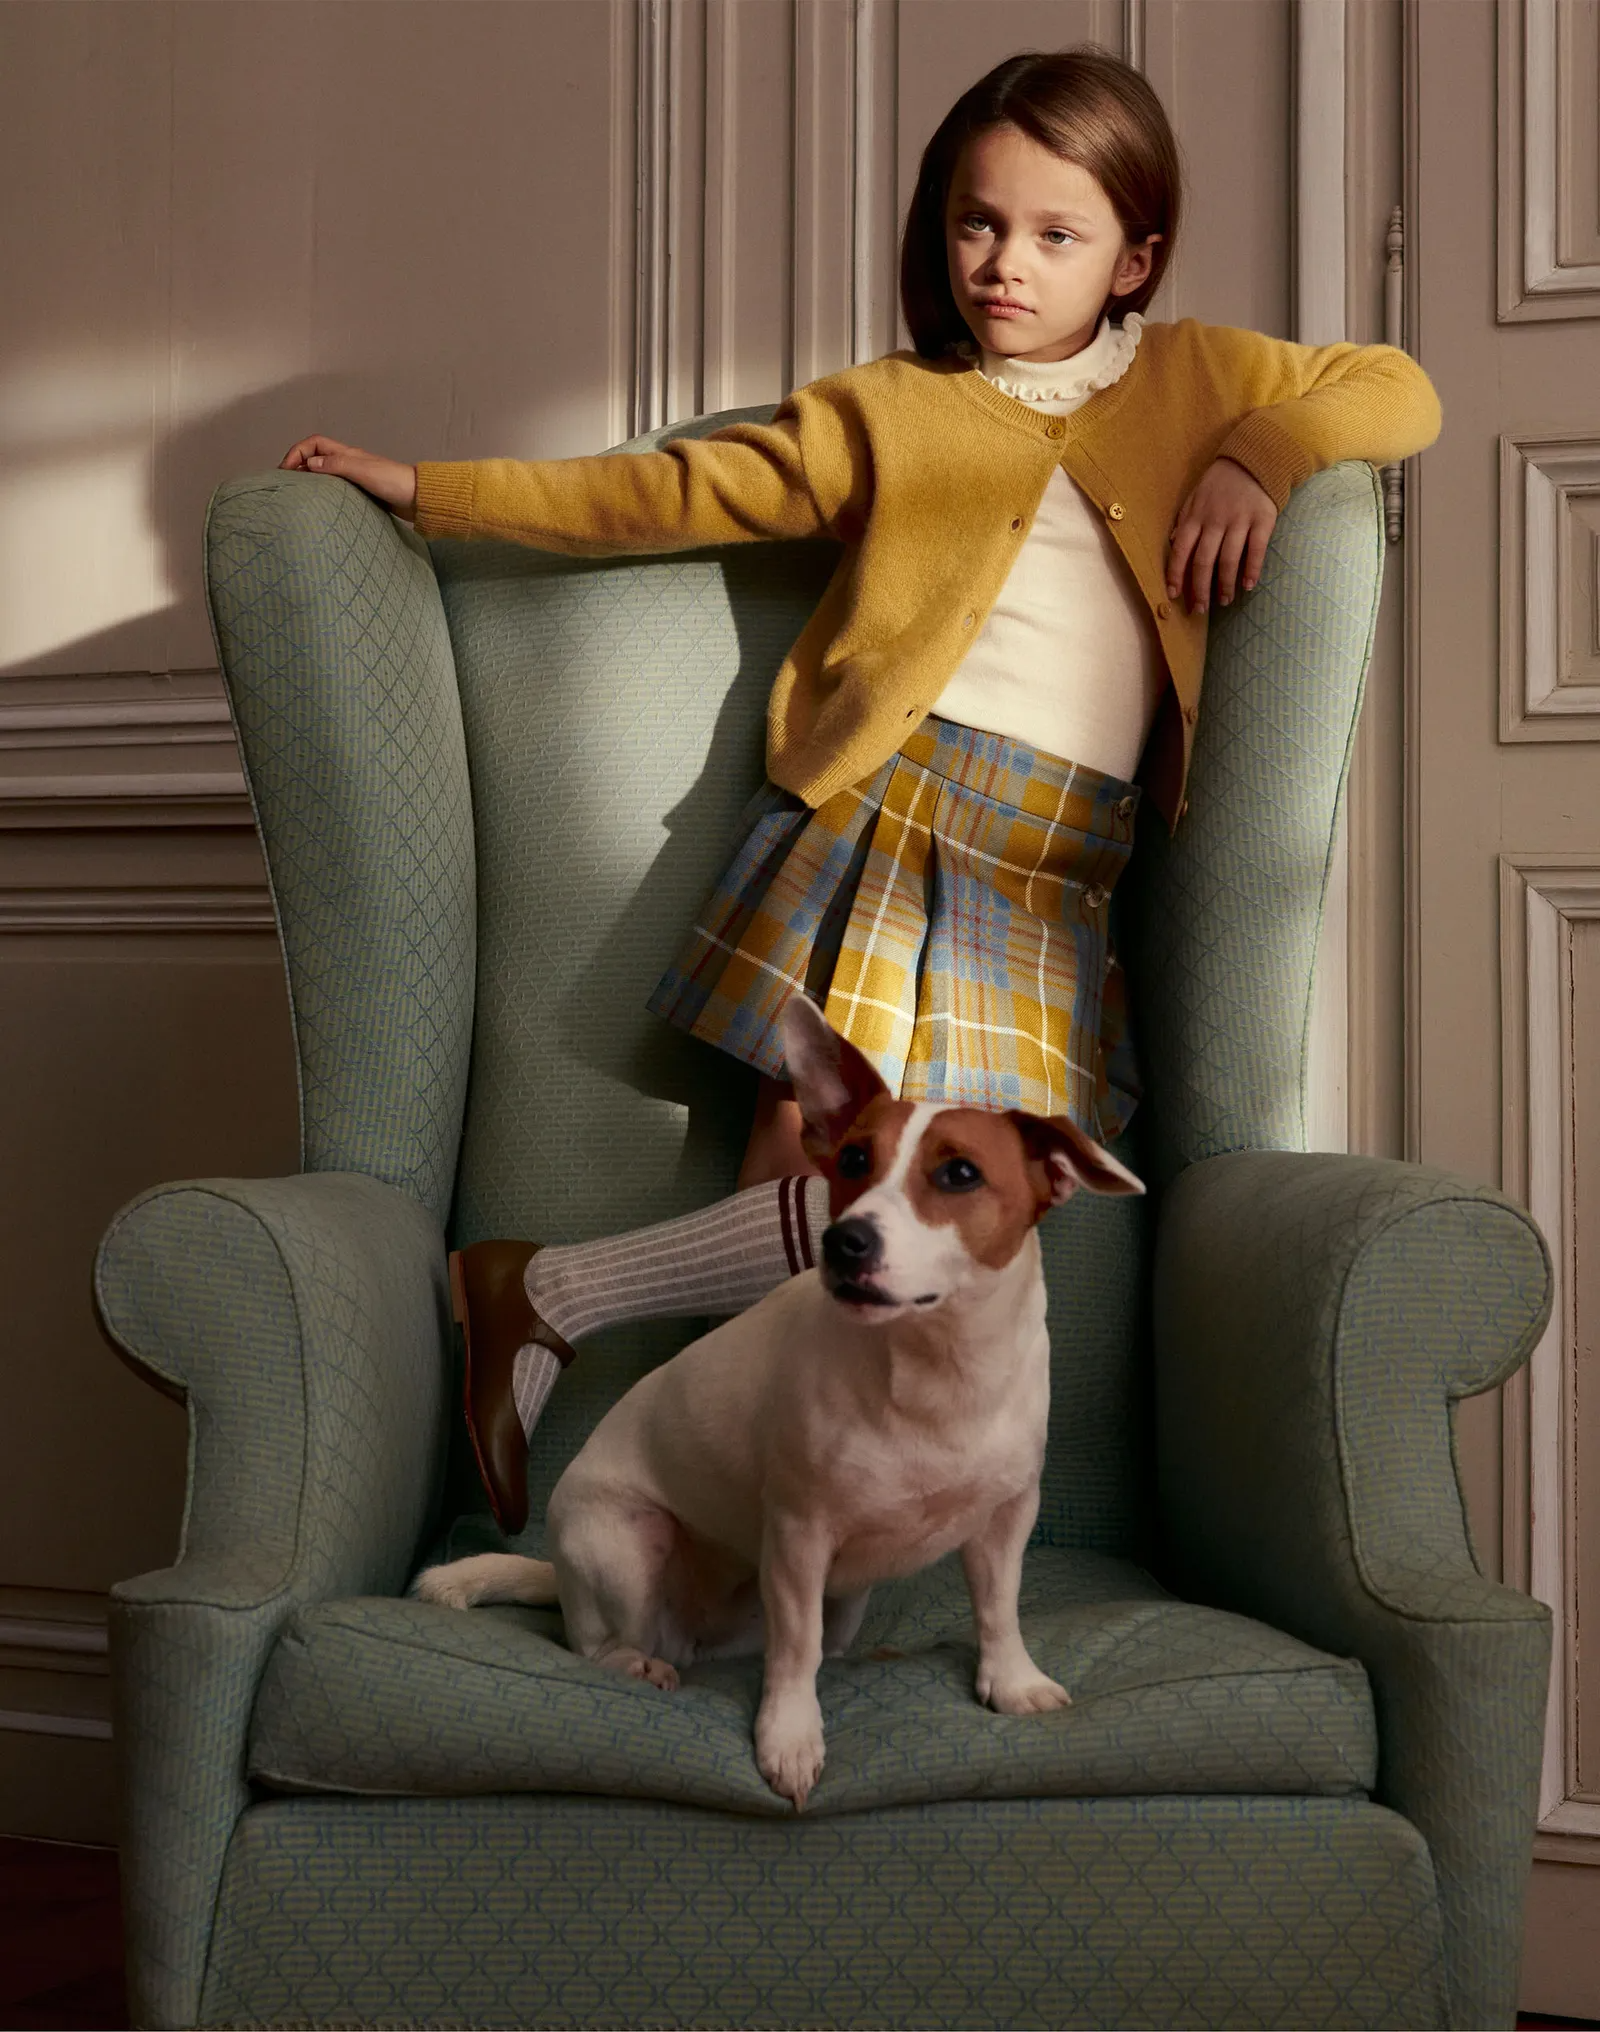 Childrenswear brand Bonpoint’s FW23 campaign. Seward’s collection will be a womenswear offering. Photo: Courtesy of Bonpoint